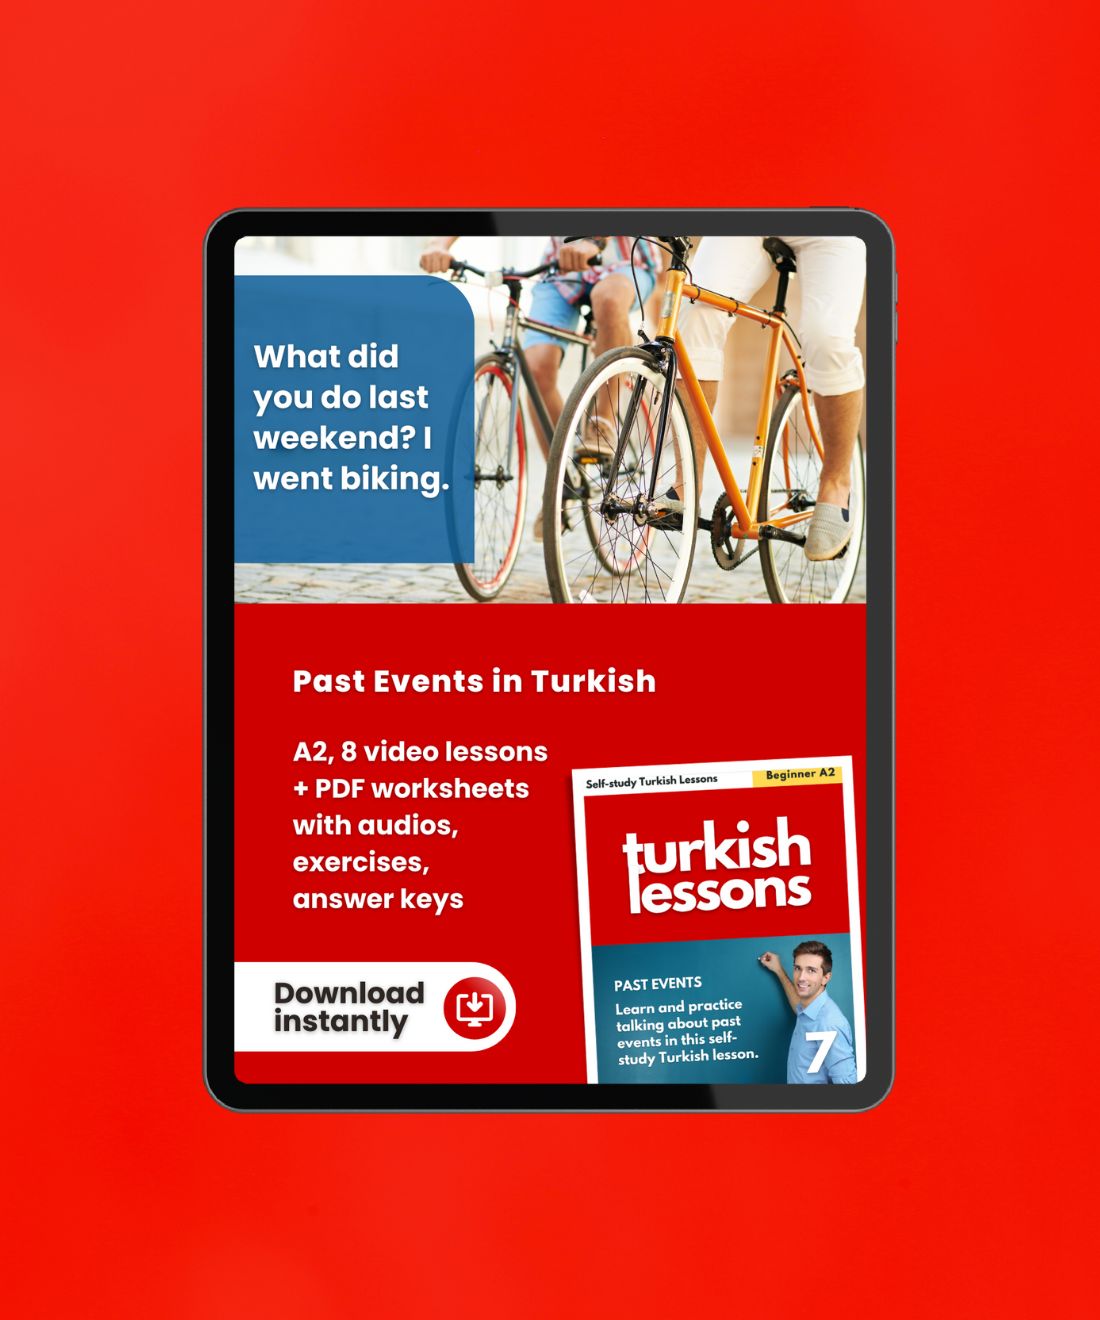 turkish lessons a2 - past events in turkish language